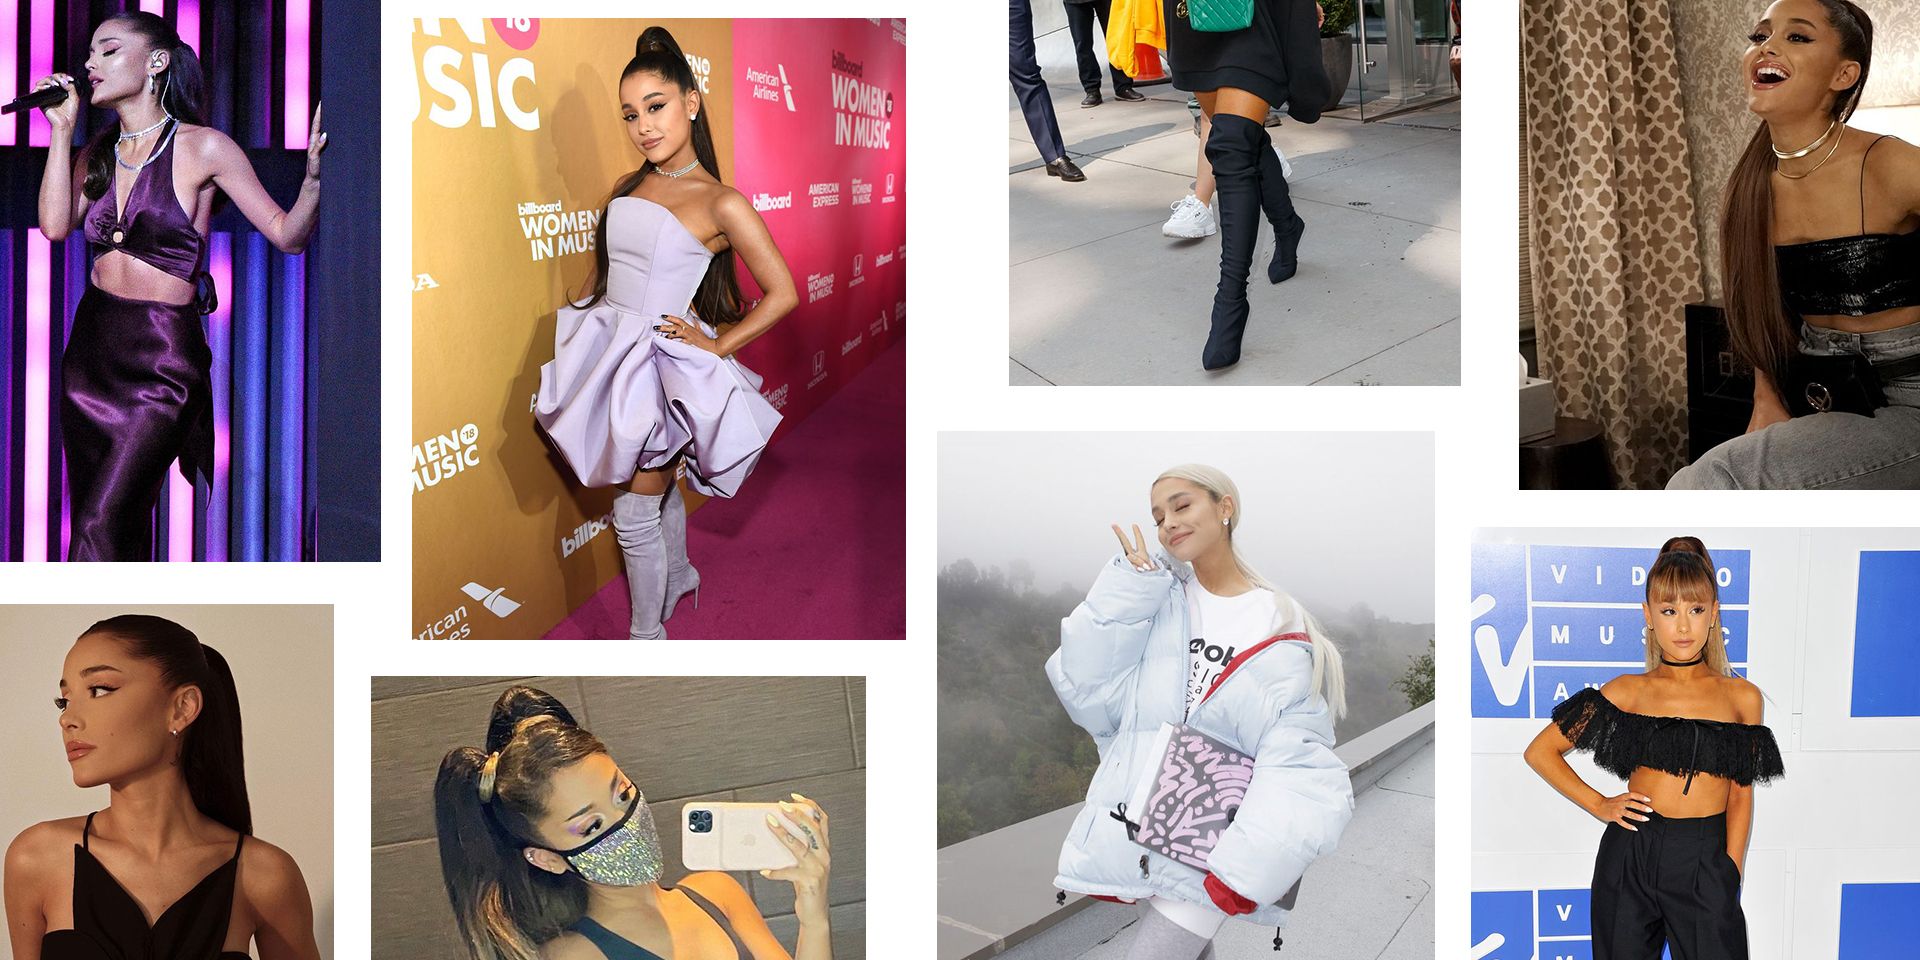 Ariana Grande Outfits, Style & Fashion: What Does She Wear